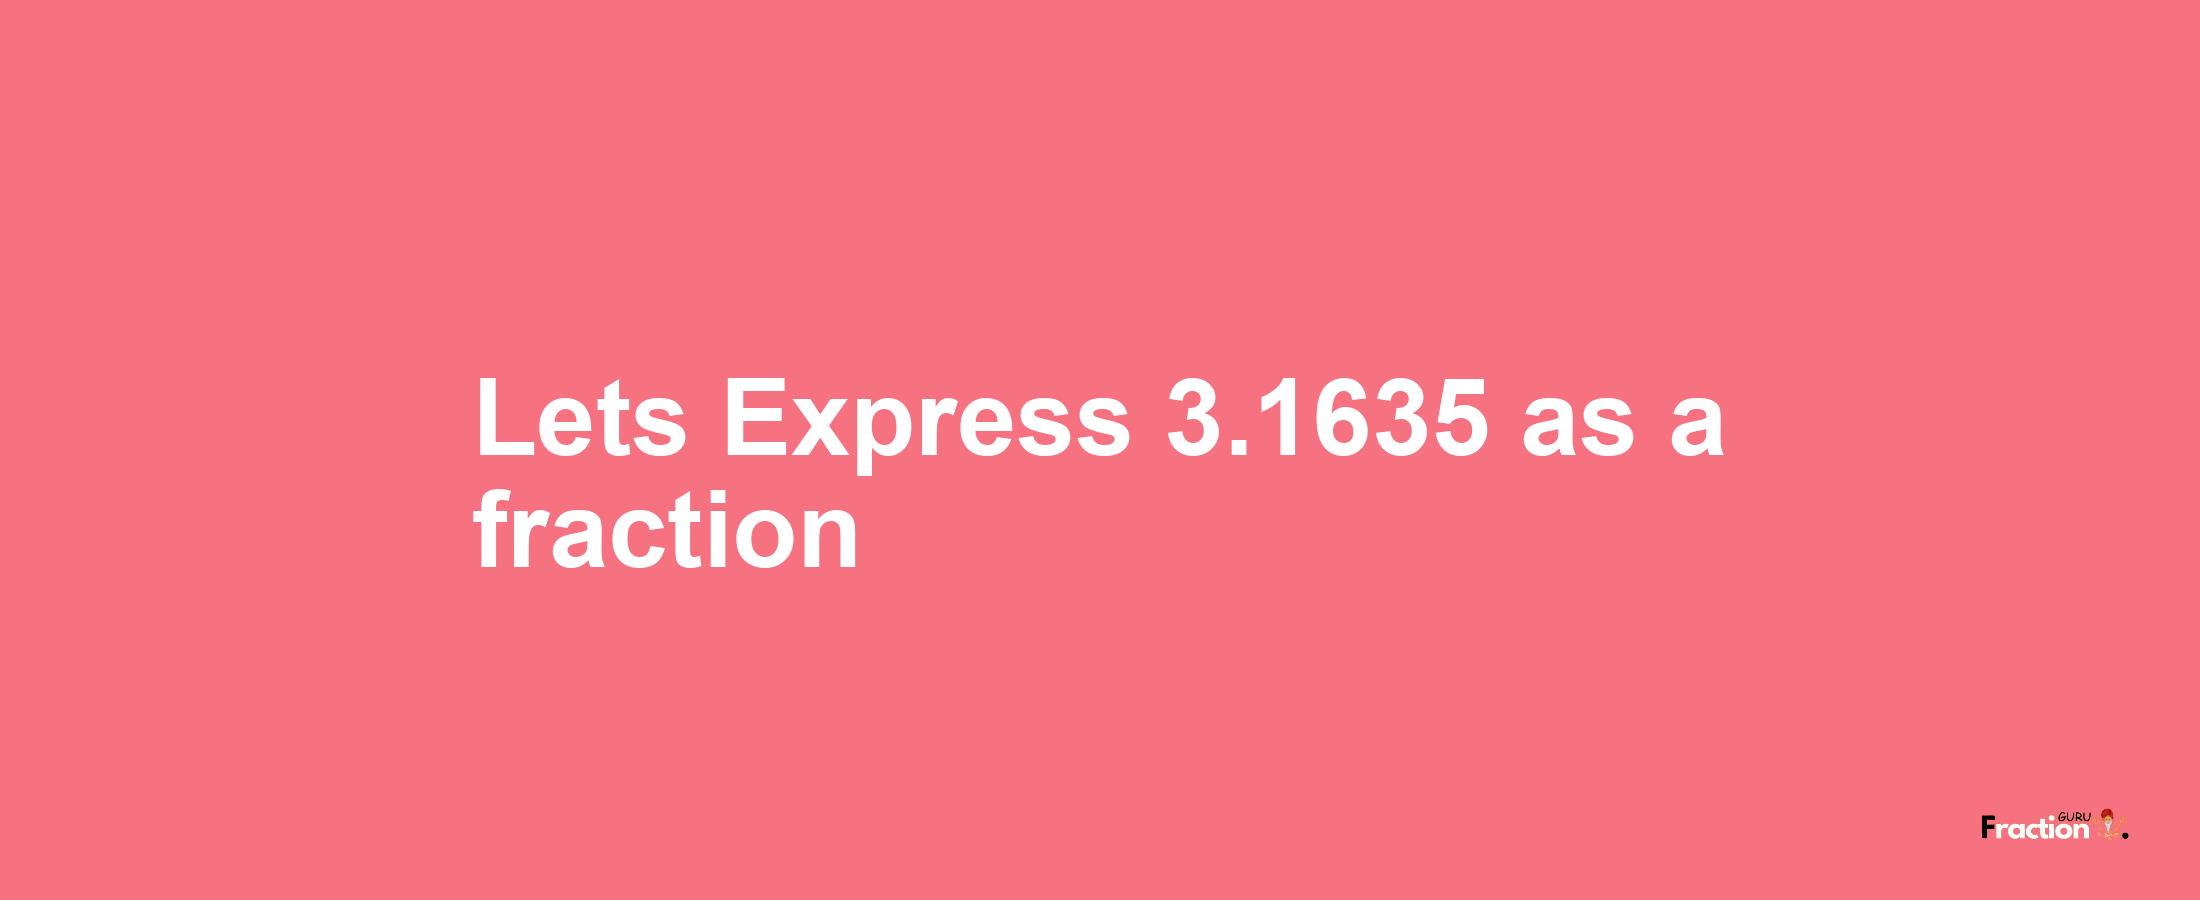 Lets Express 3.1635 as afraction